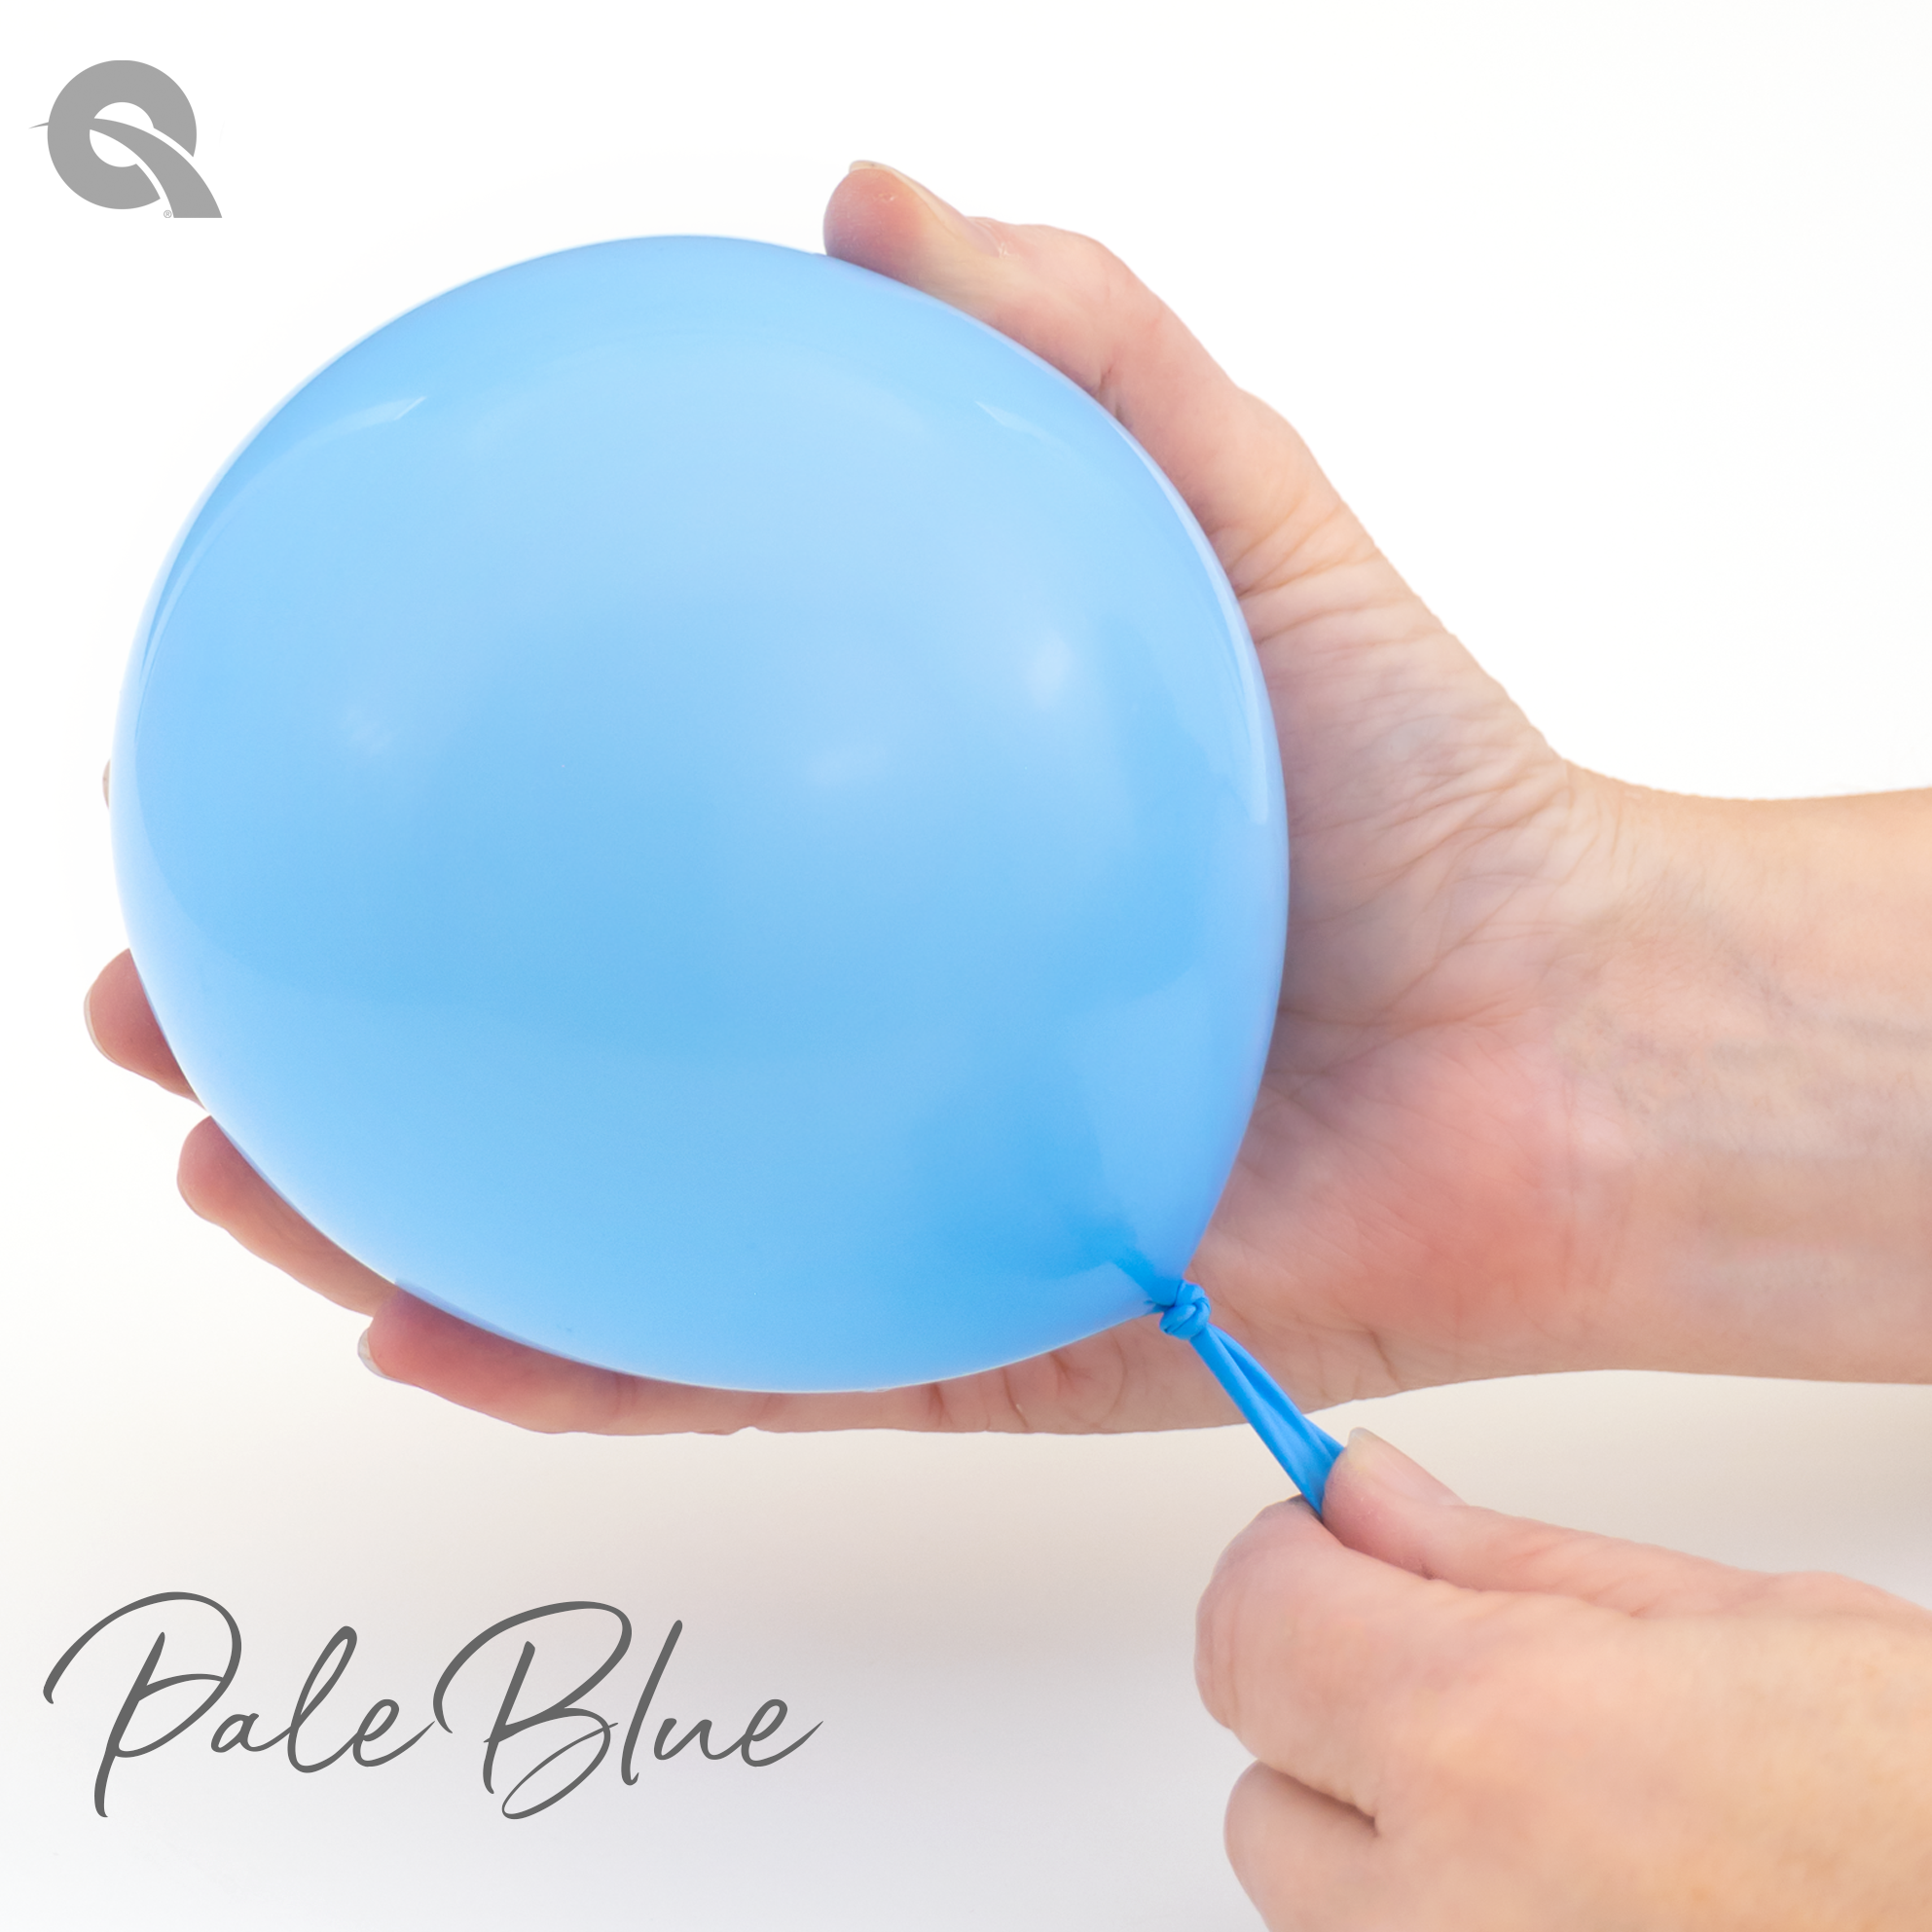 6" Qualatex QuickLink® Pale Blue Latex Balloons | 50 Count